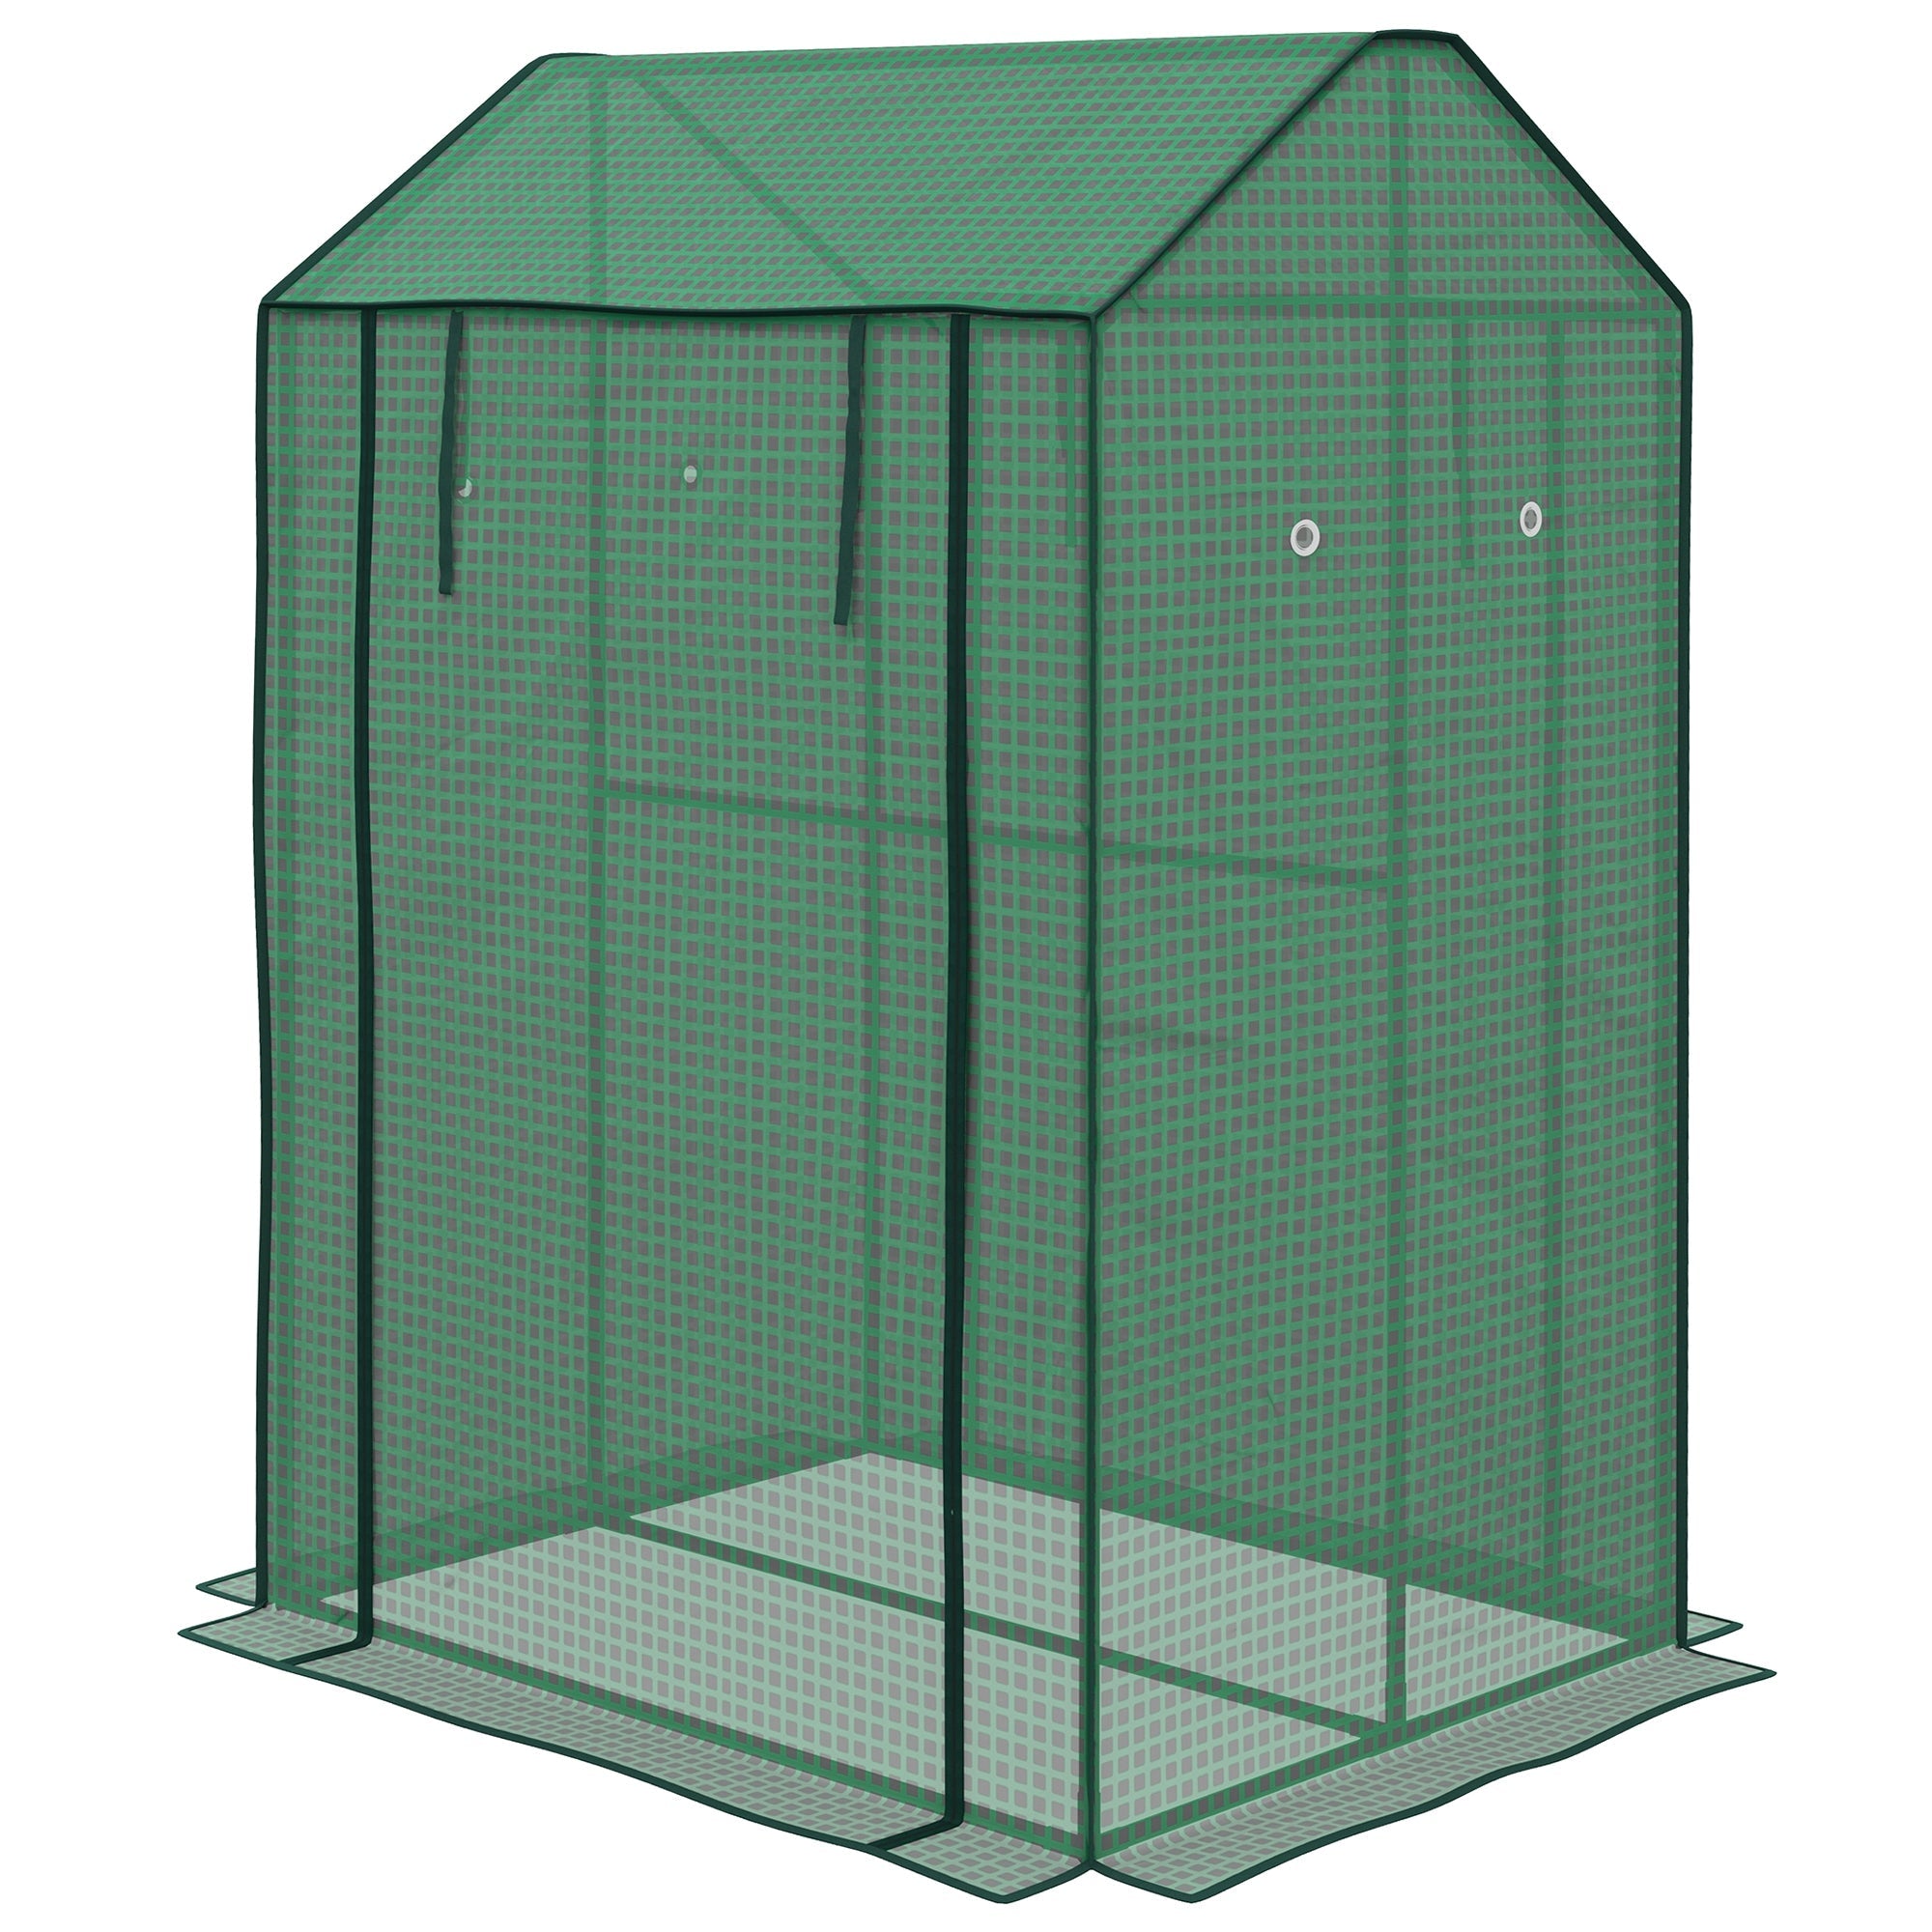 2-Room Green House, Mini Greenhouse with 2 Roll-up Doors, Vent Holes and Reinforced Cover, 100 x 80 x 150cm-0